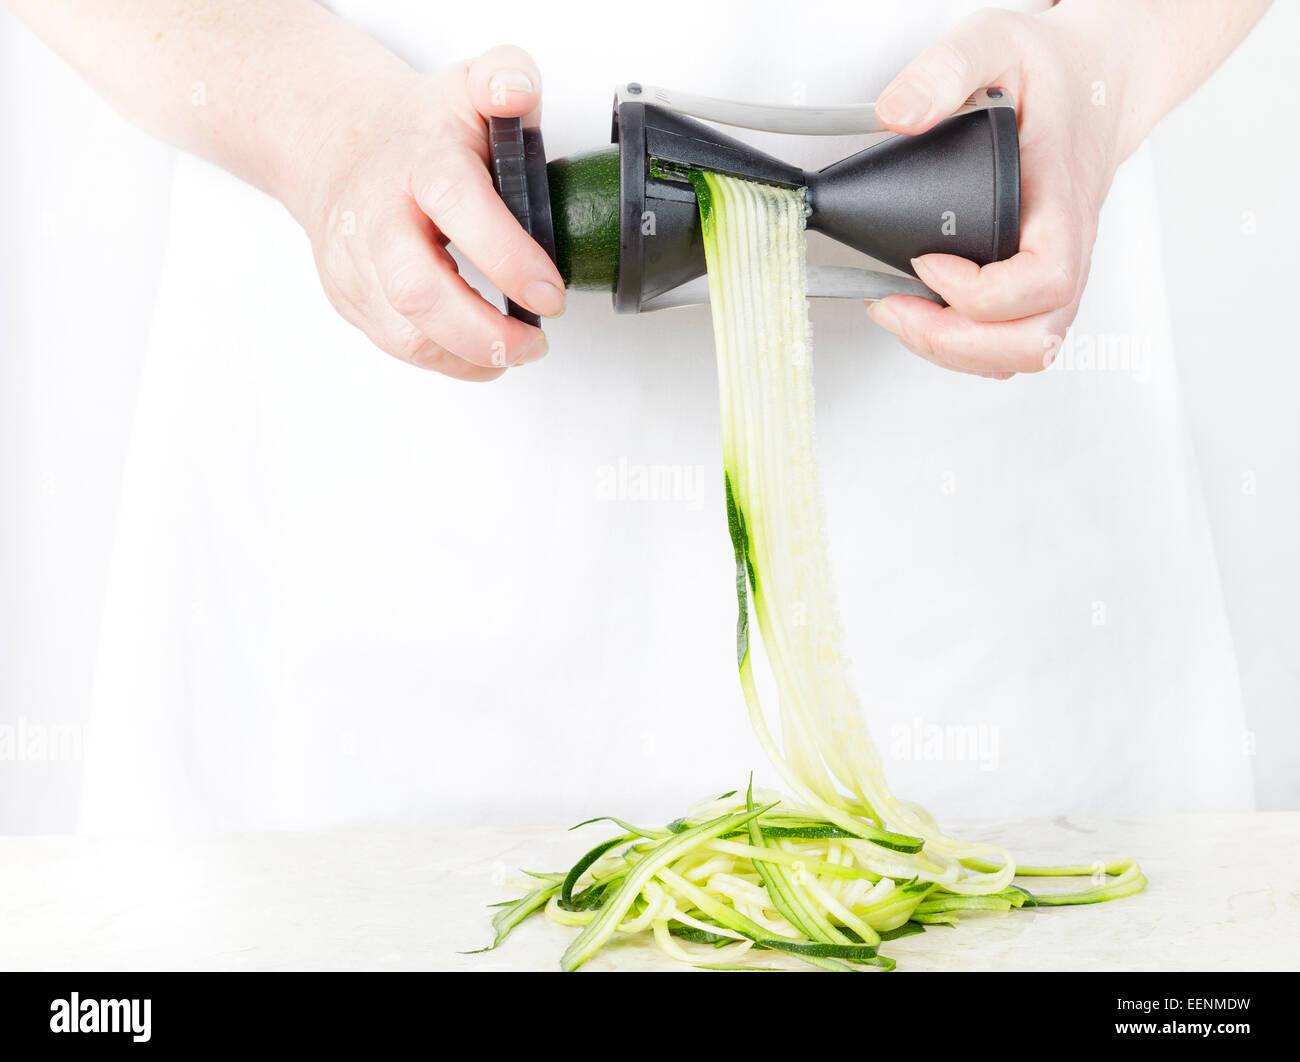 https://c8.alamy.com/comp/EENMDW/using-a-vegetable-spiral-maker-to-make-courgette-zucchini-noodles-EENMDW.jpg